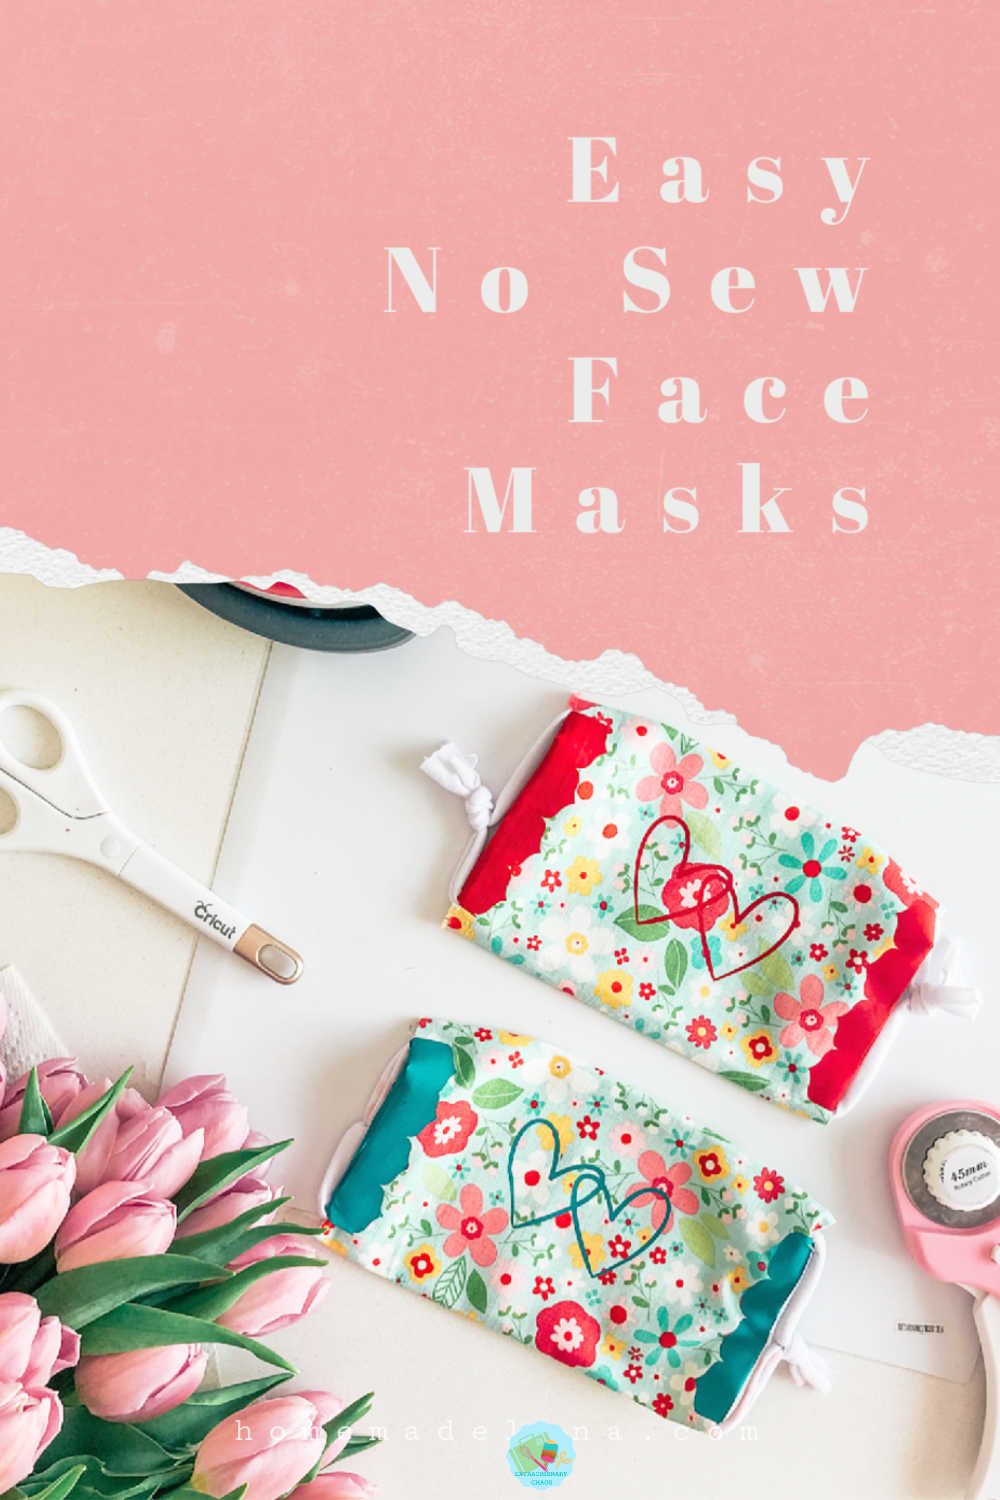 Easy children's face books, no need to sew just use Cricut Iron On Vinyl to seal the edges and jersey ear wraps for comfort #kidsmasks #facemasksforchildren #prettyfacemasks